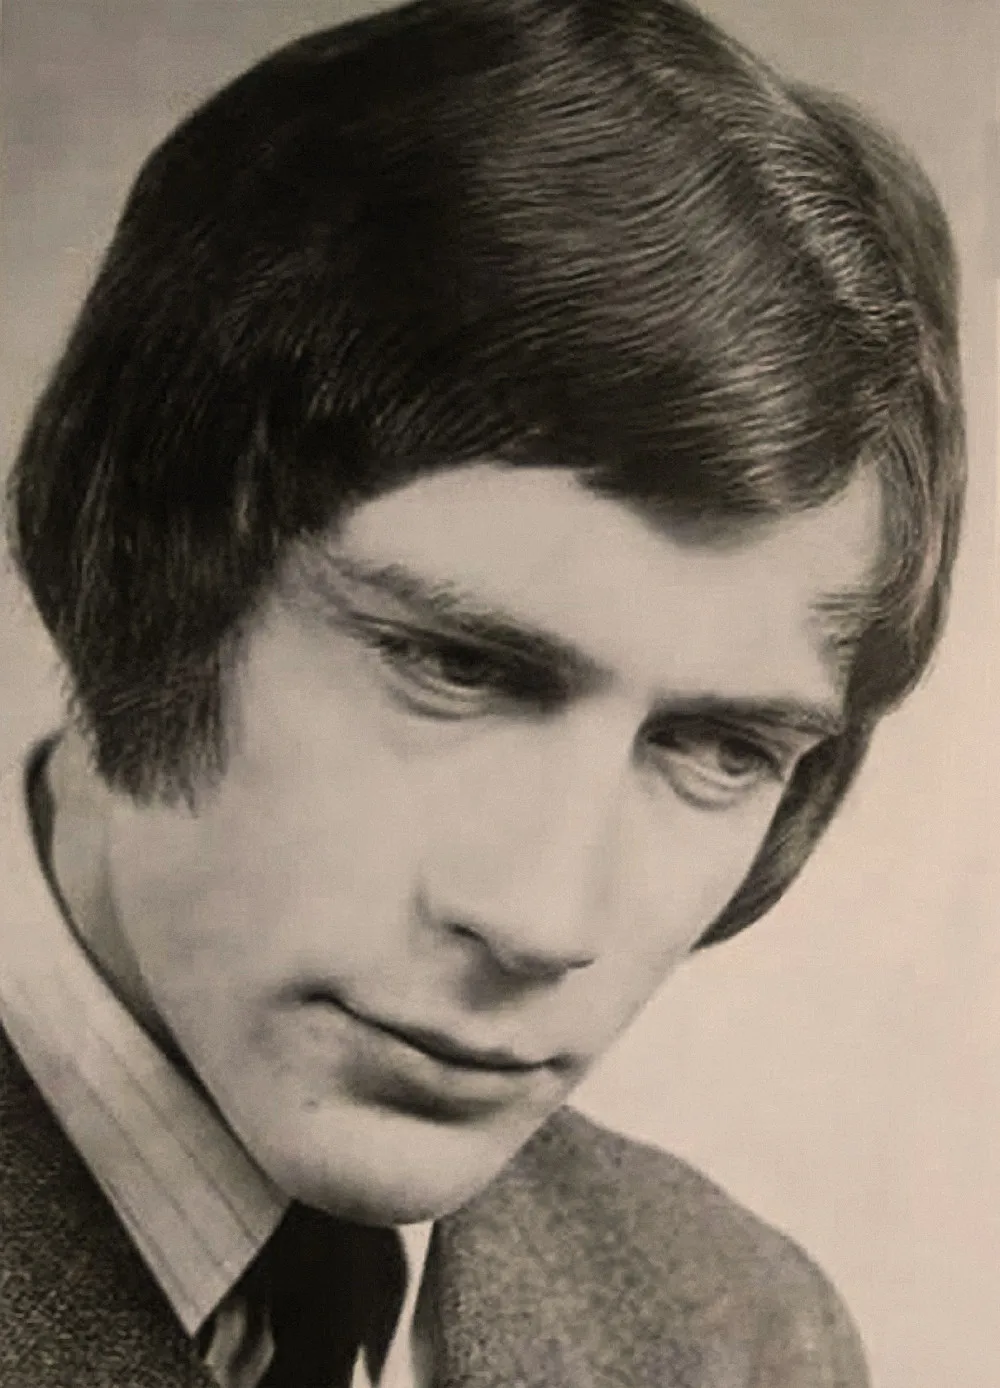 Romantic men's hairstyle from the 1960s–1970s - Rare Historical Photos